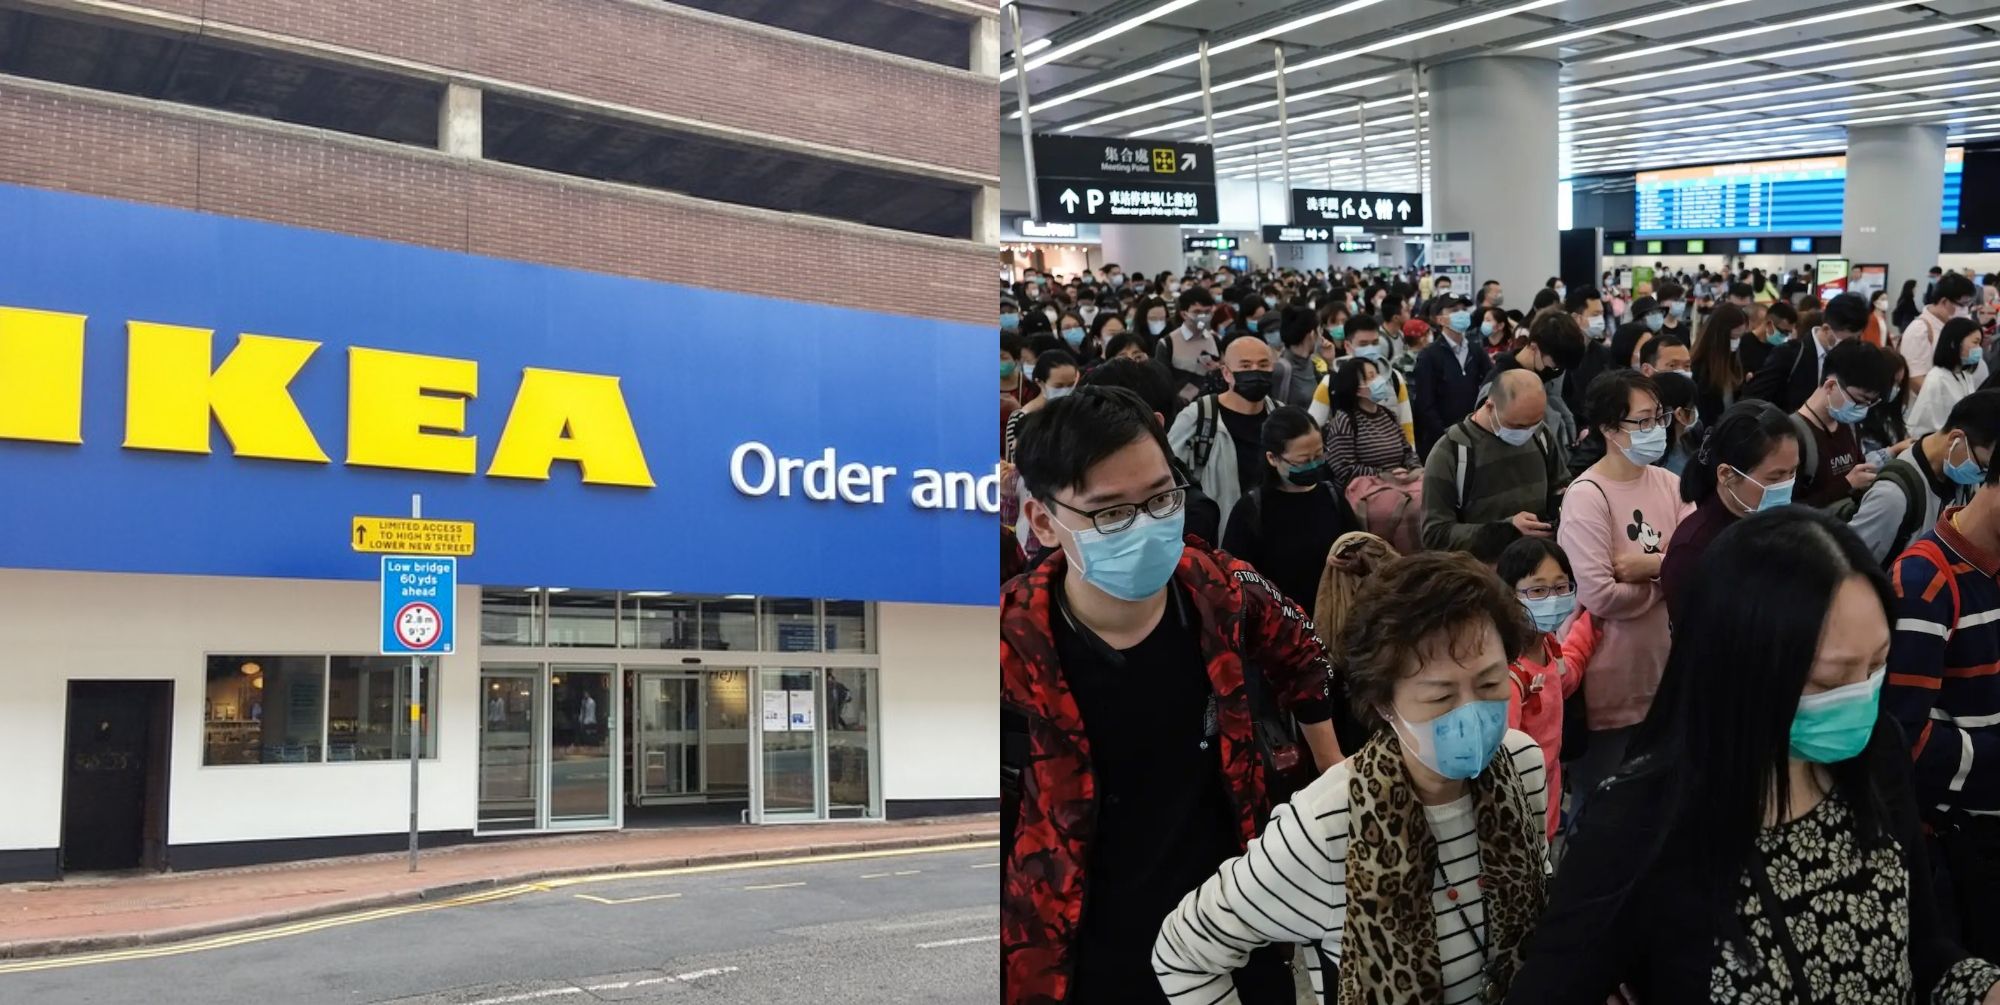 ikea store and people wearing masks in airport